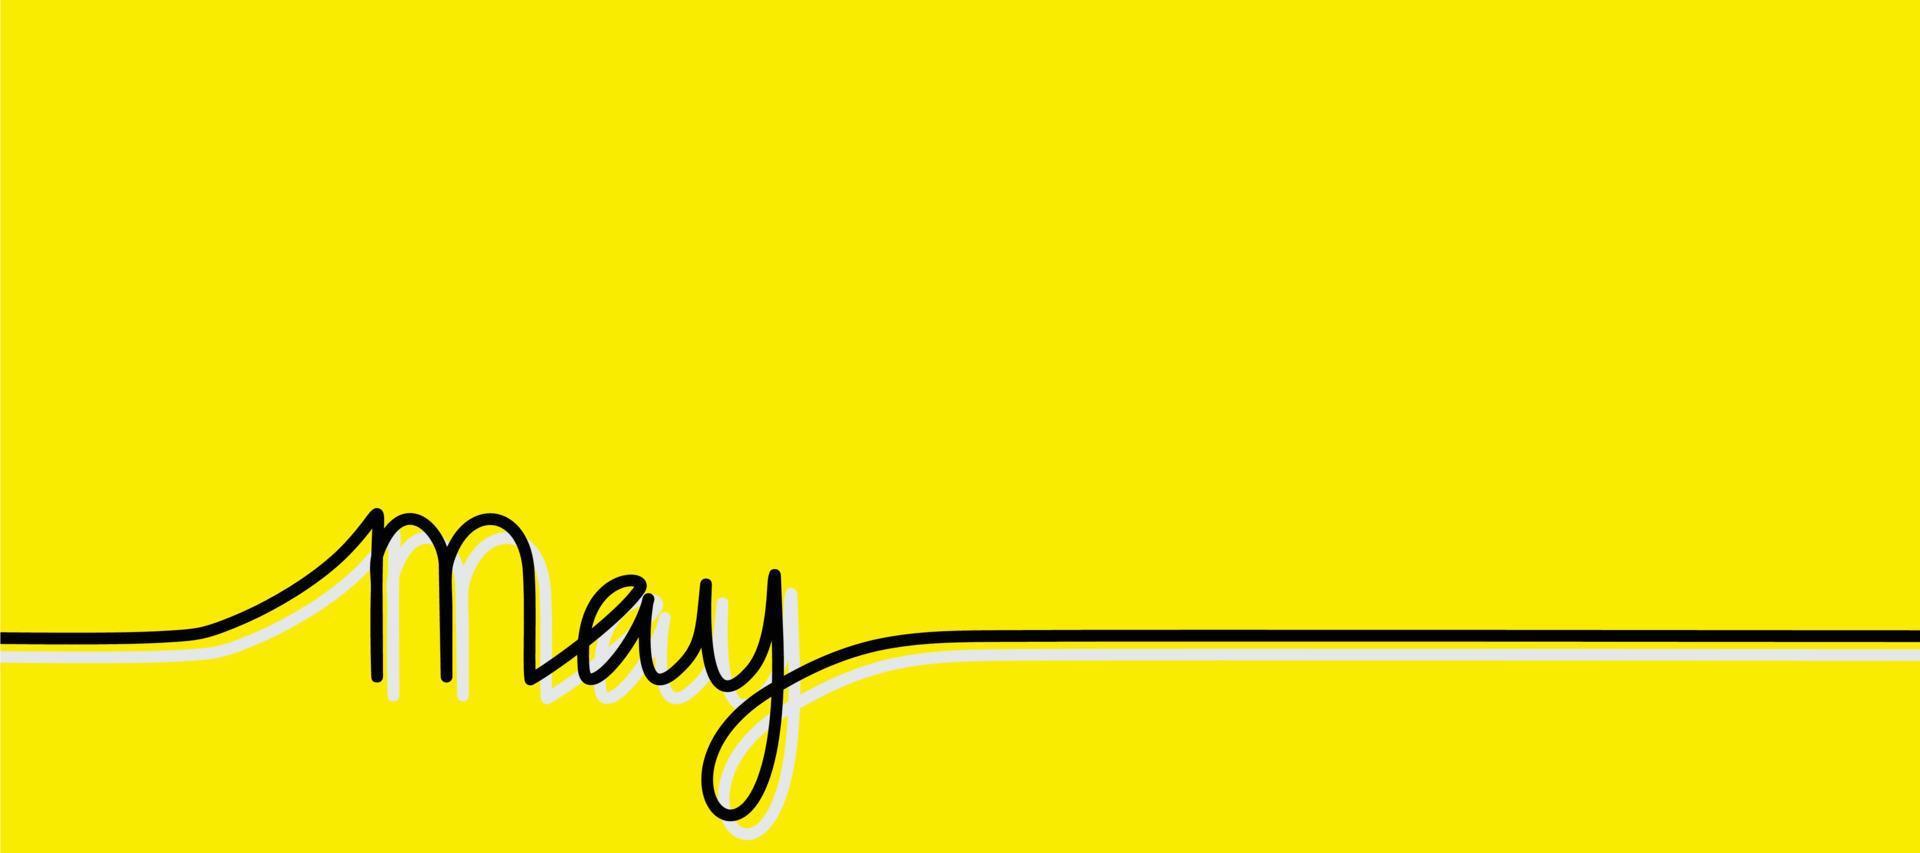 Yellow background vector design with may lettering